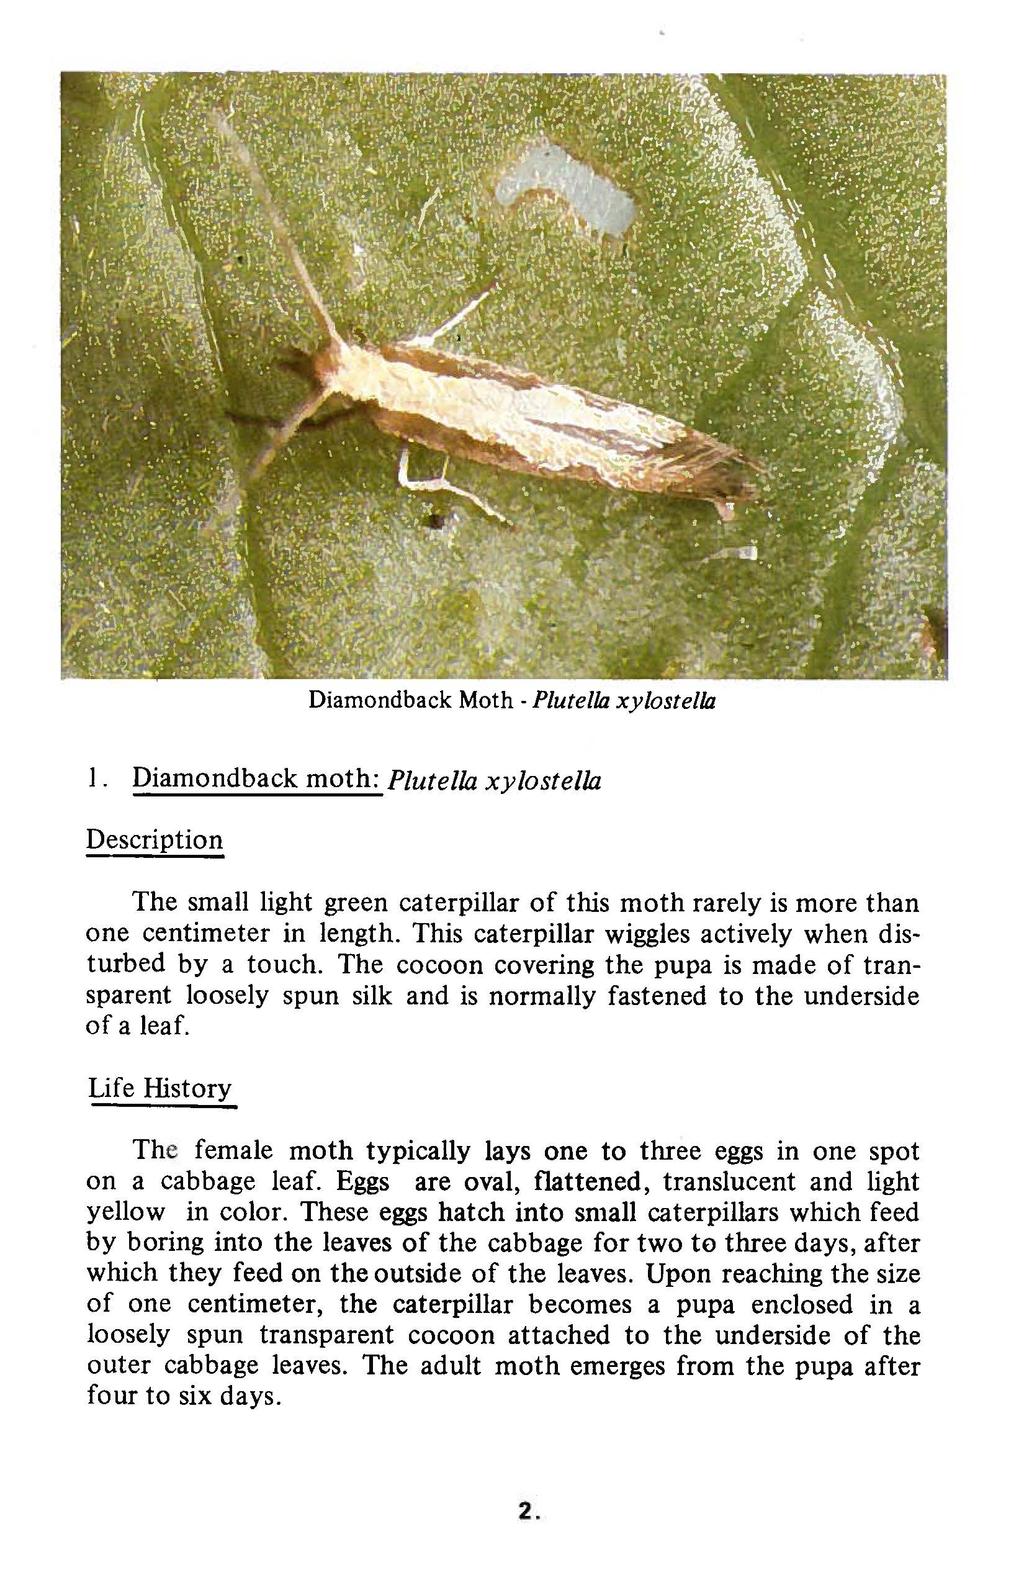 Diamondback Moth - Plutel/a xylostel/a 1. Diamondback moth: Plutel/a xylostel/a Description The small light green caterpillar of this moth rarely is more than one centimeter in length.